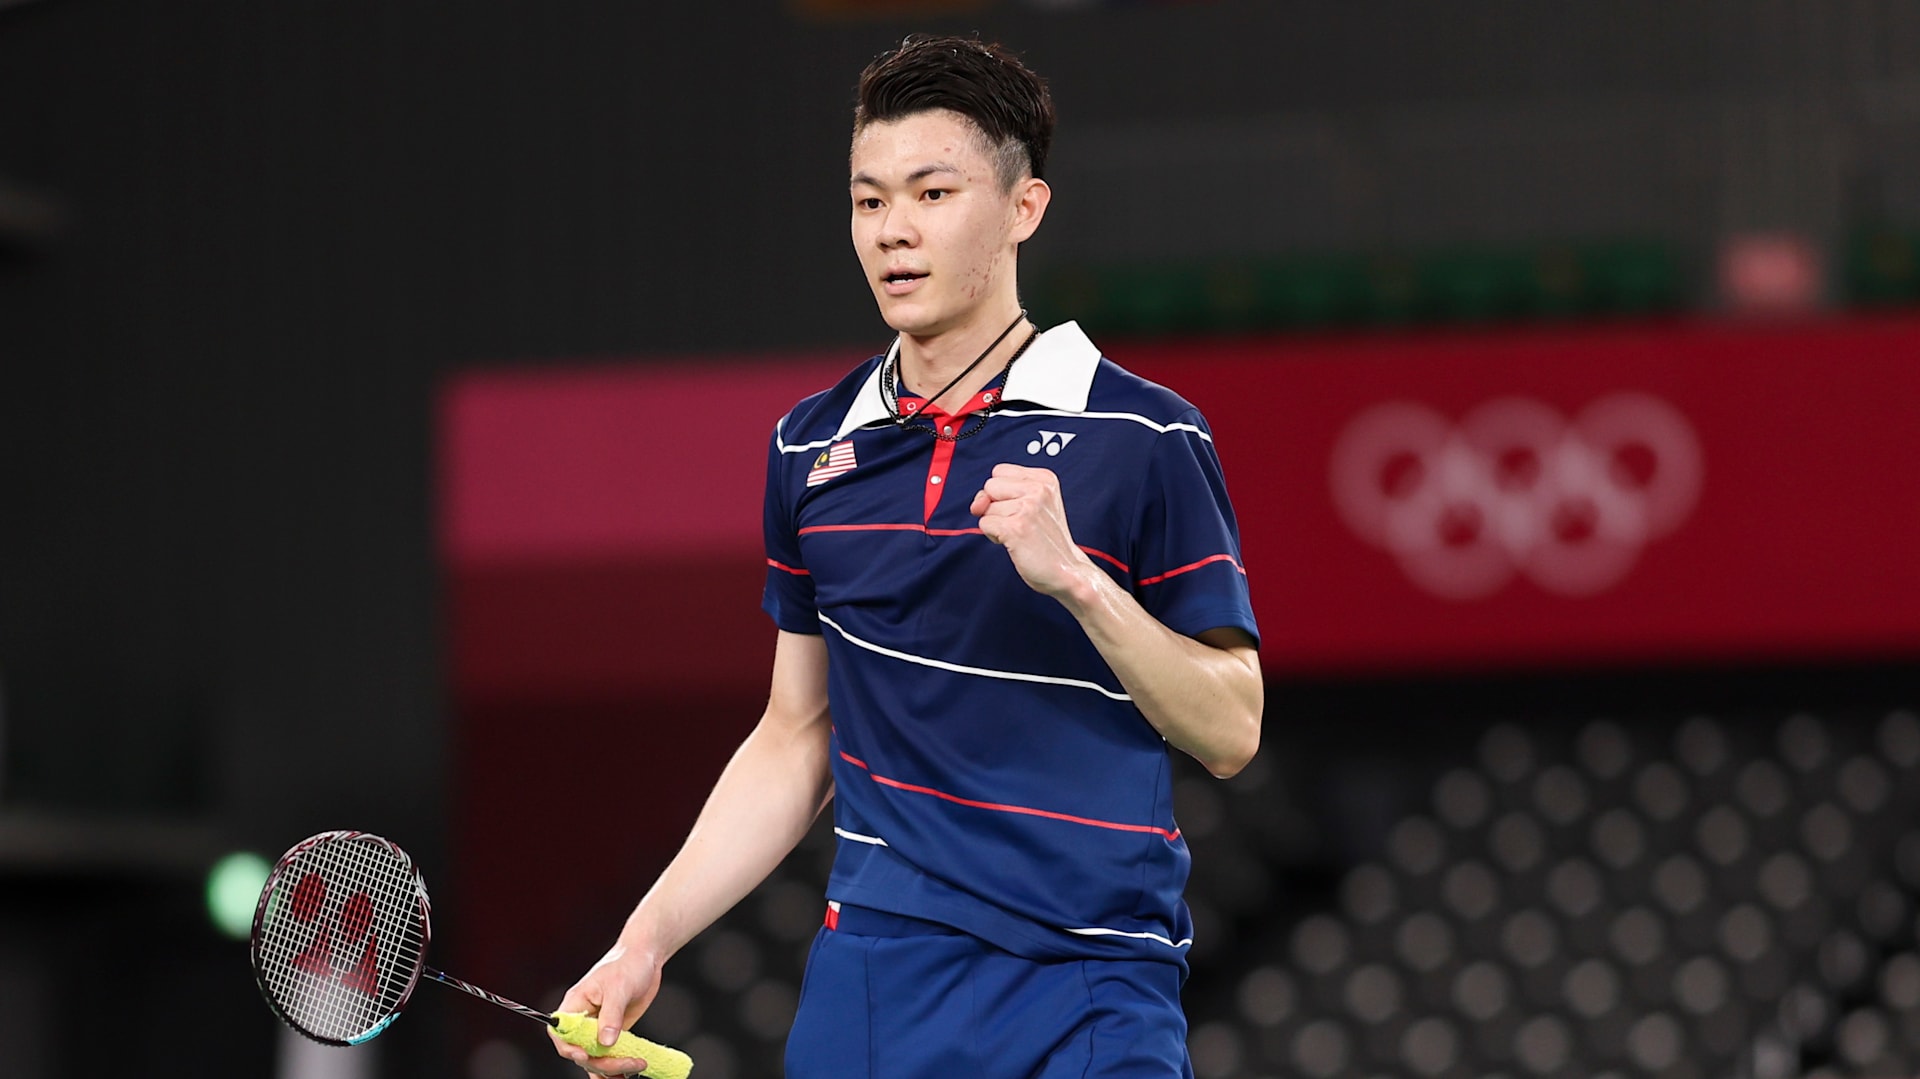 Can badminton star Lee Zii Jia become World No.1?